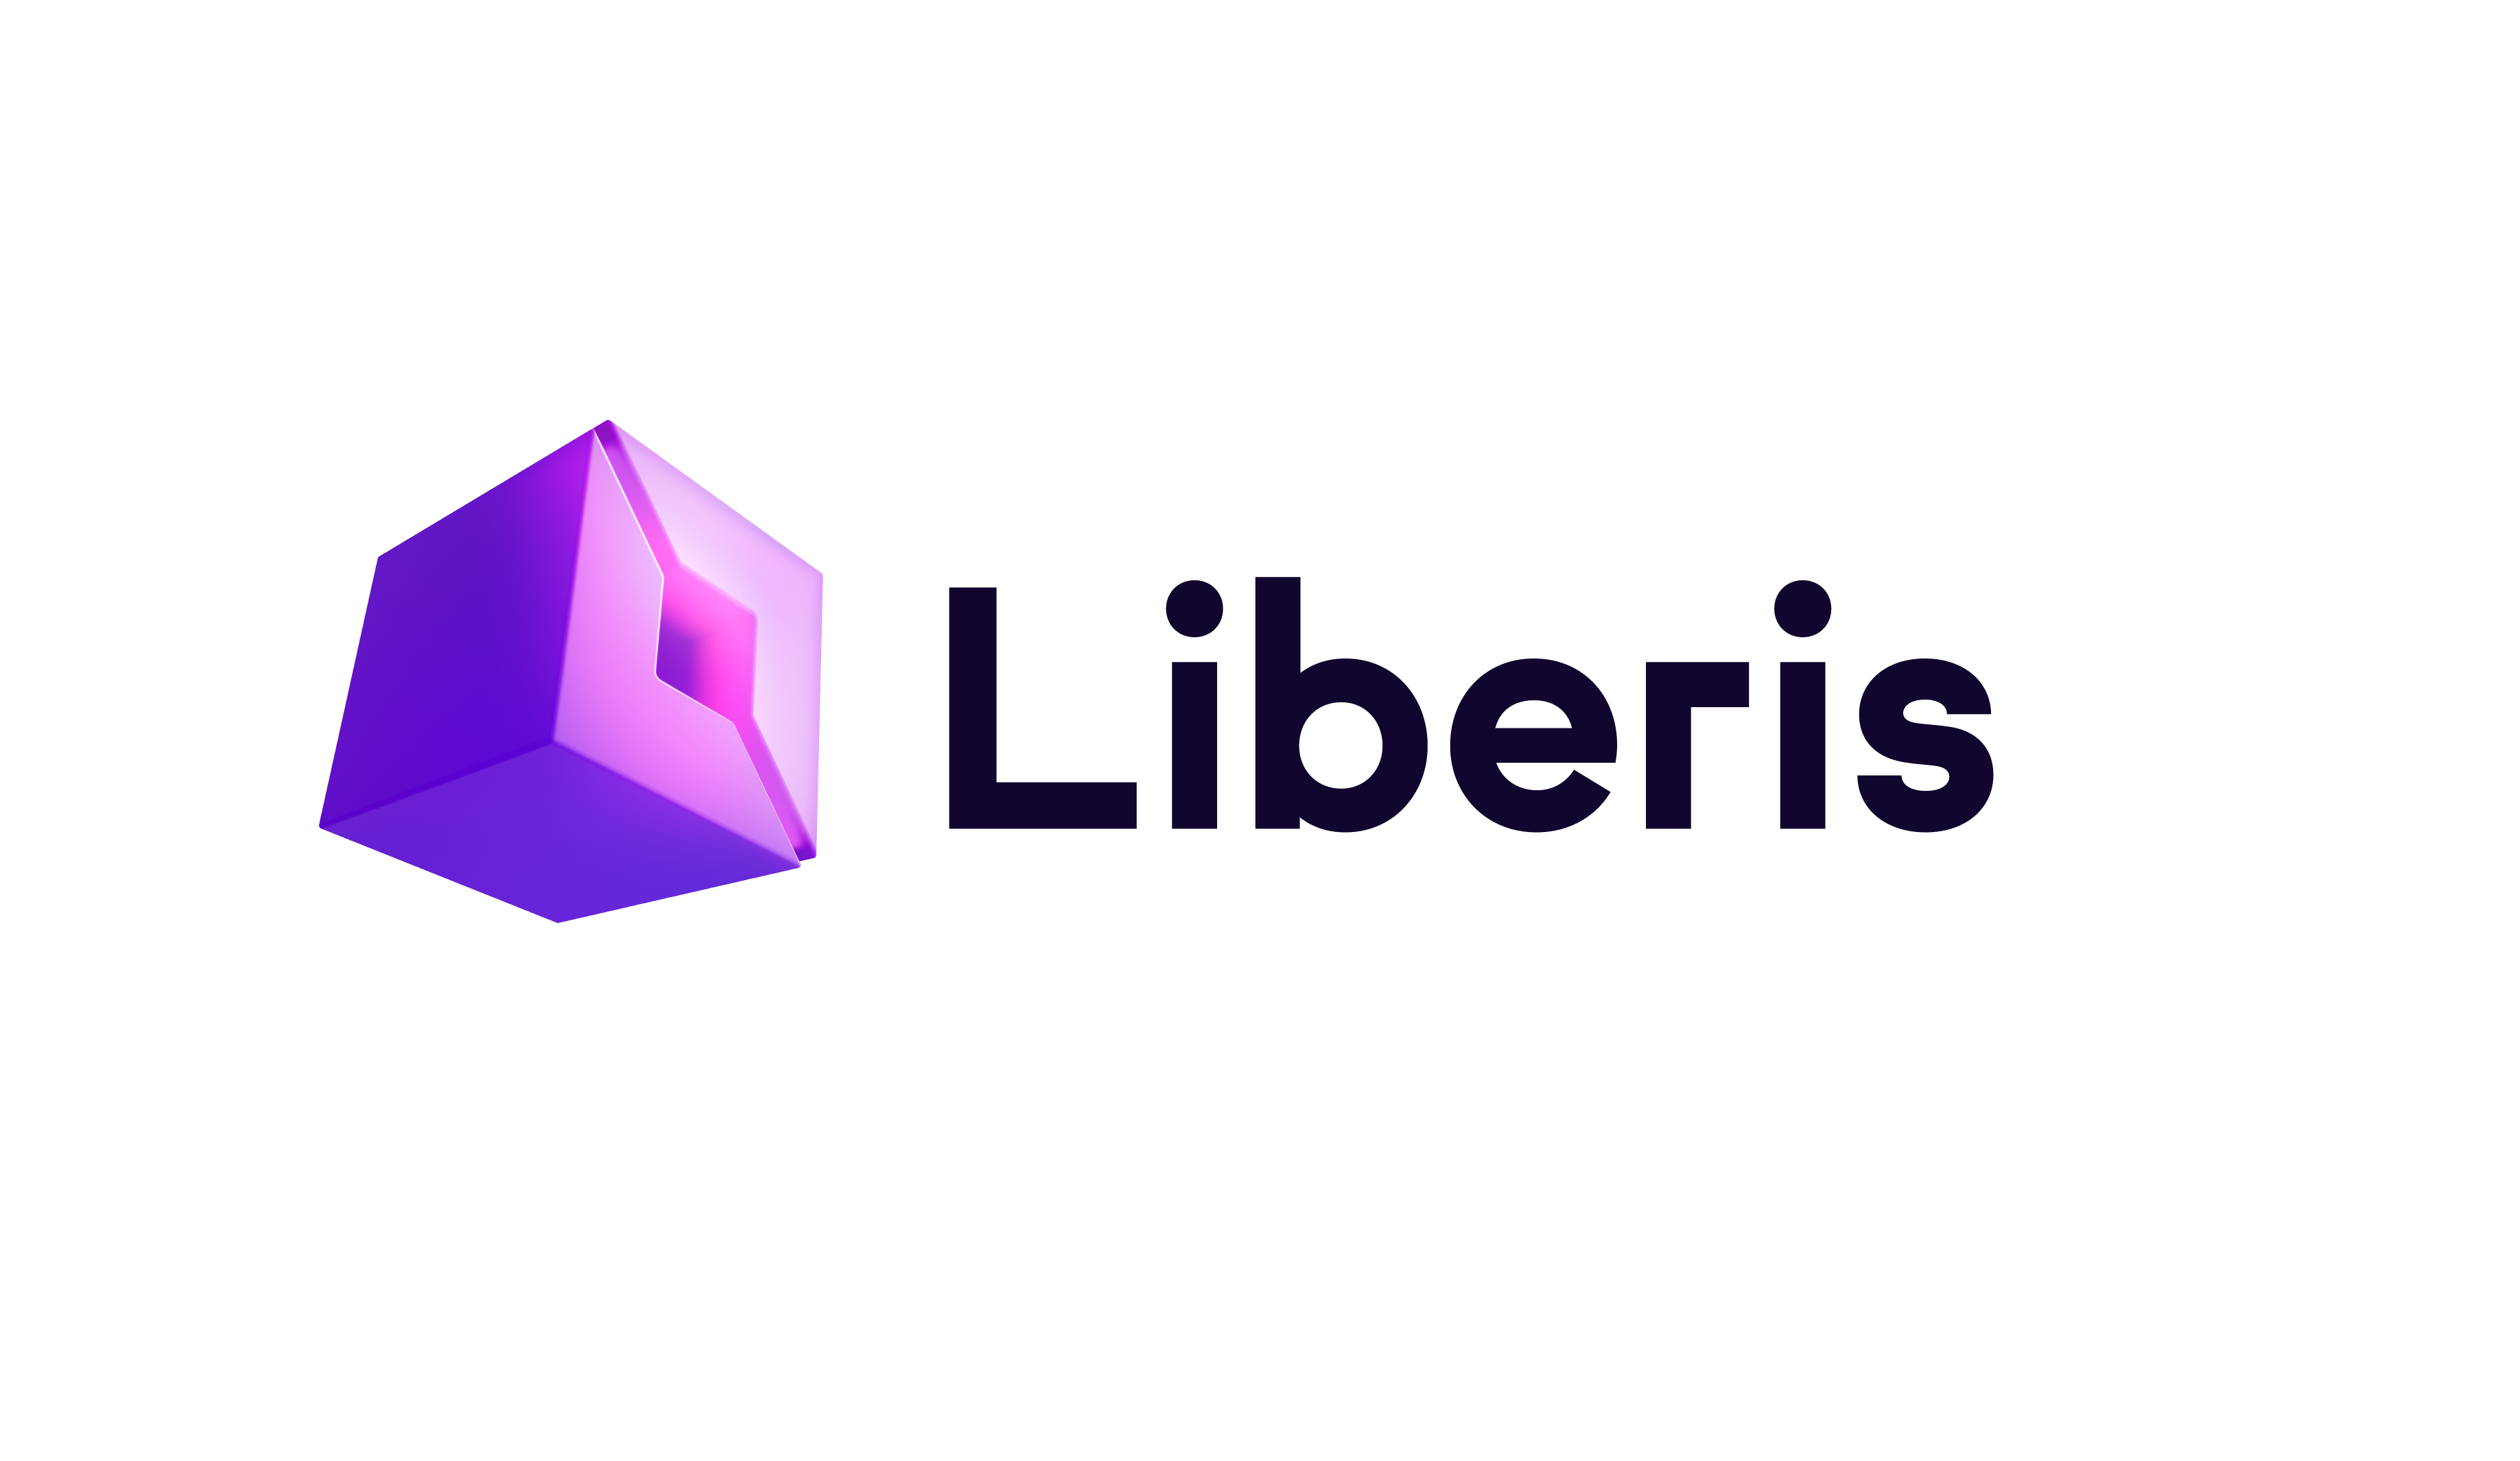 Liberis Doubles Down on Embedded Business Finance, Exclusively Offering Solutions Through Partners